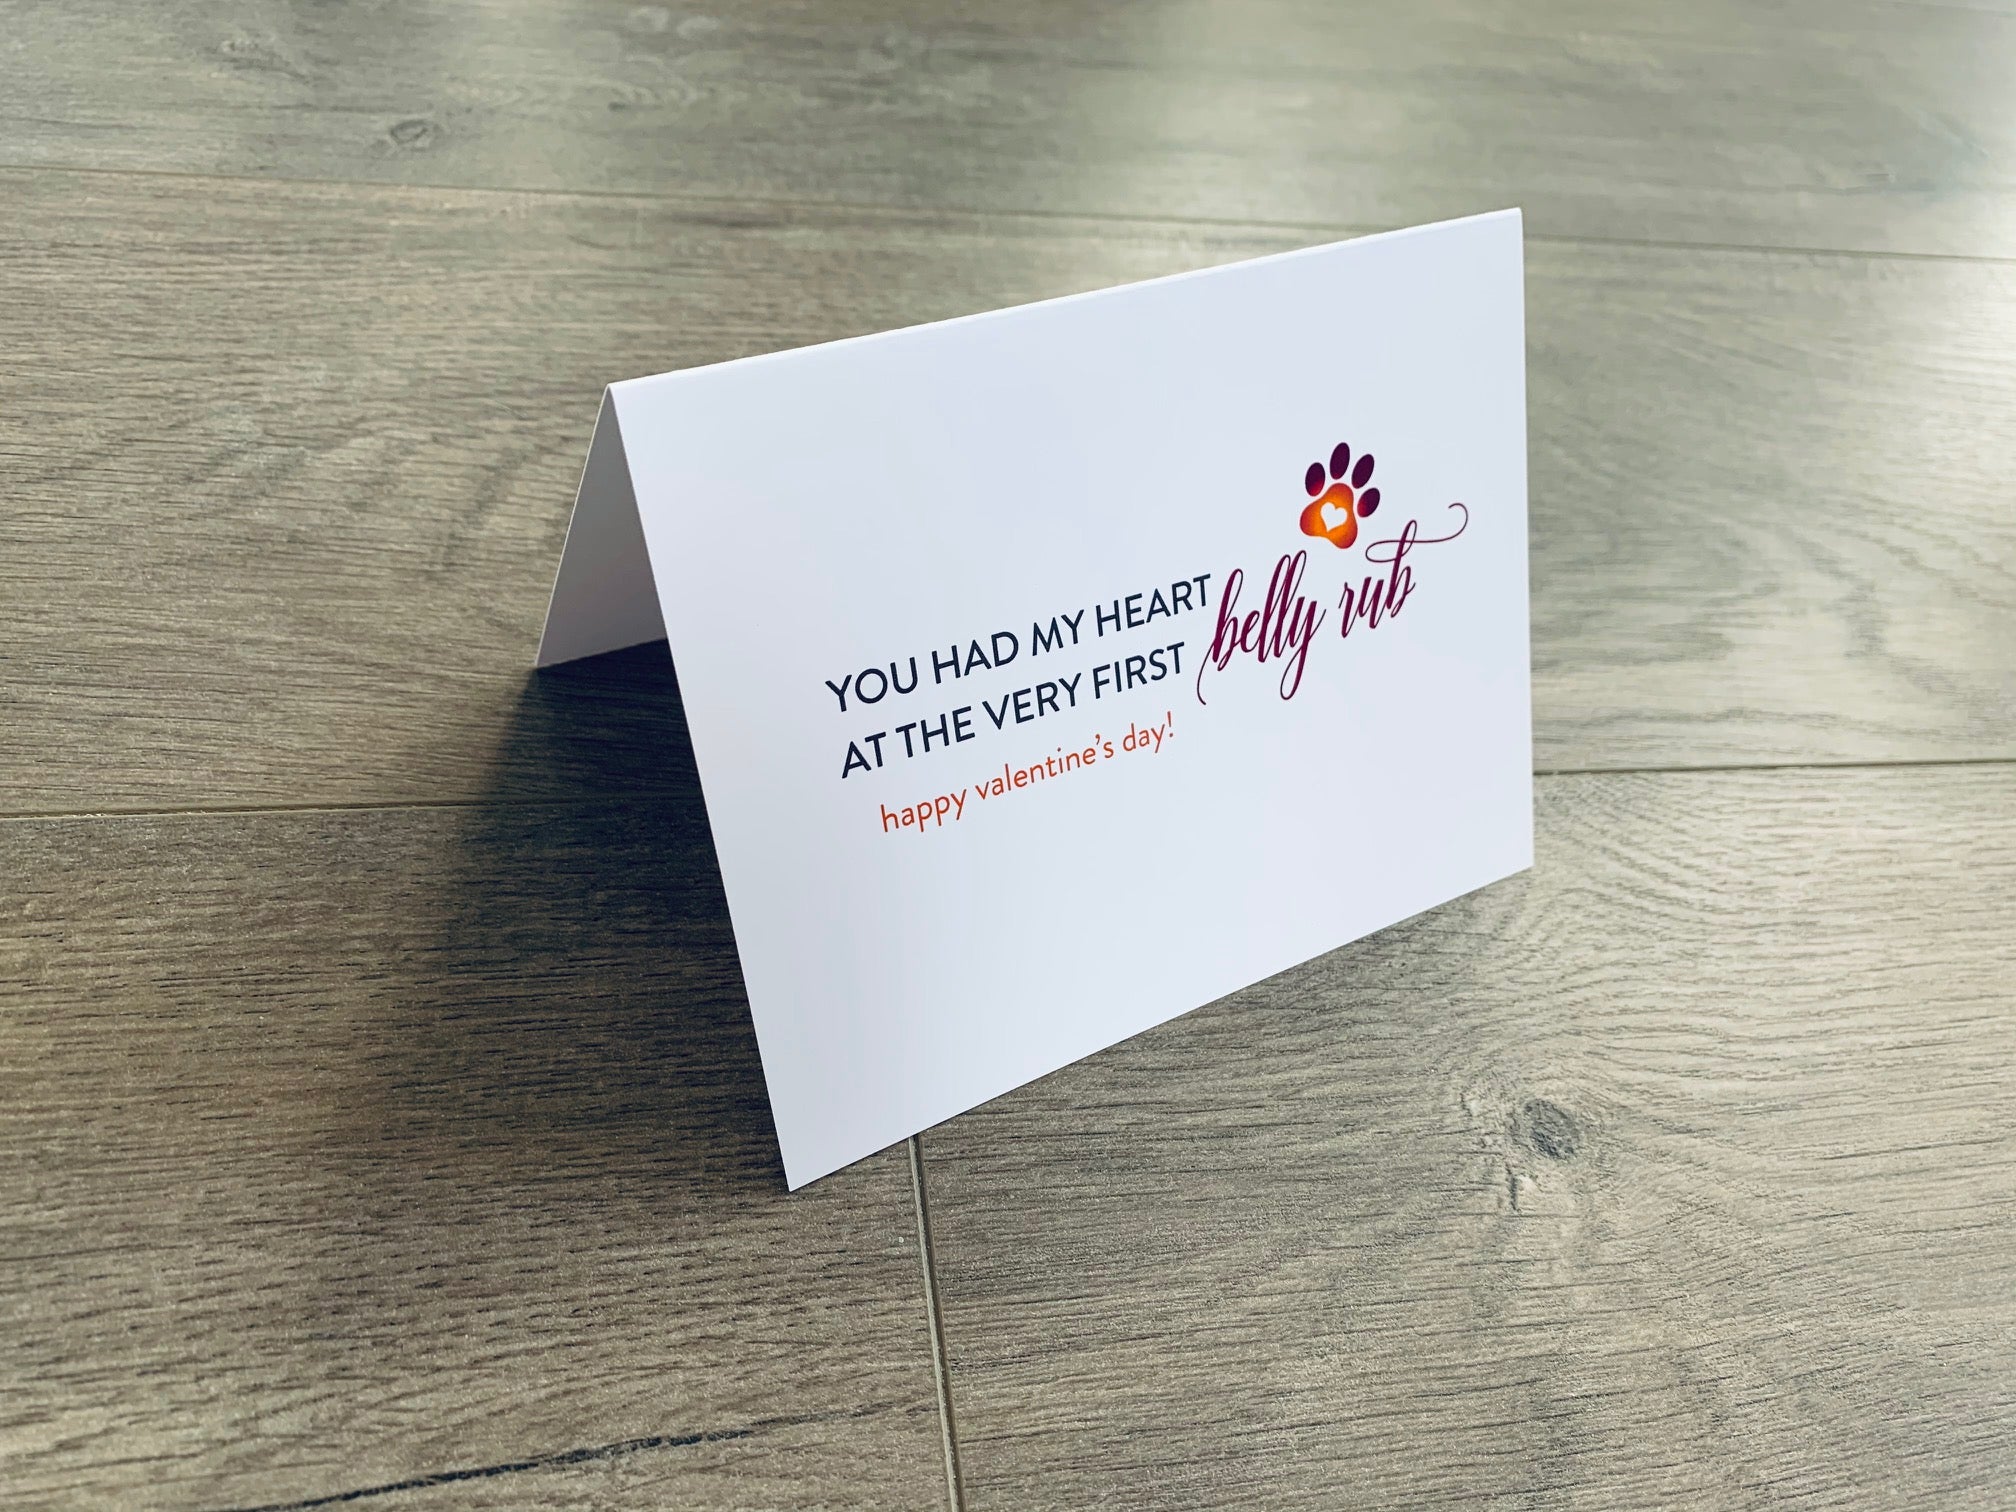 A folded white notecard is folded and propped up on a gray wooden background. The card says, "You had my heart at the very first belly rub. Happy Valentine's Day!" Valentines from the Pup collection by Stationare.